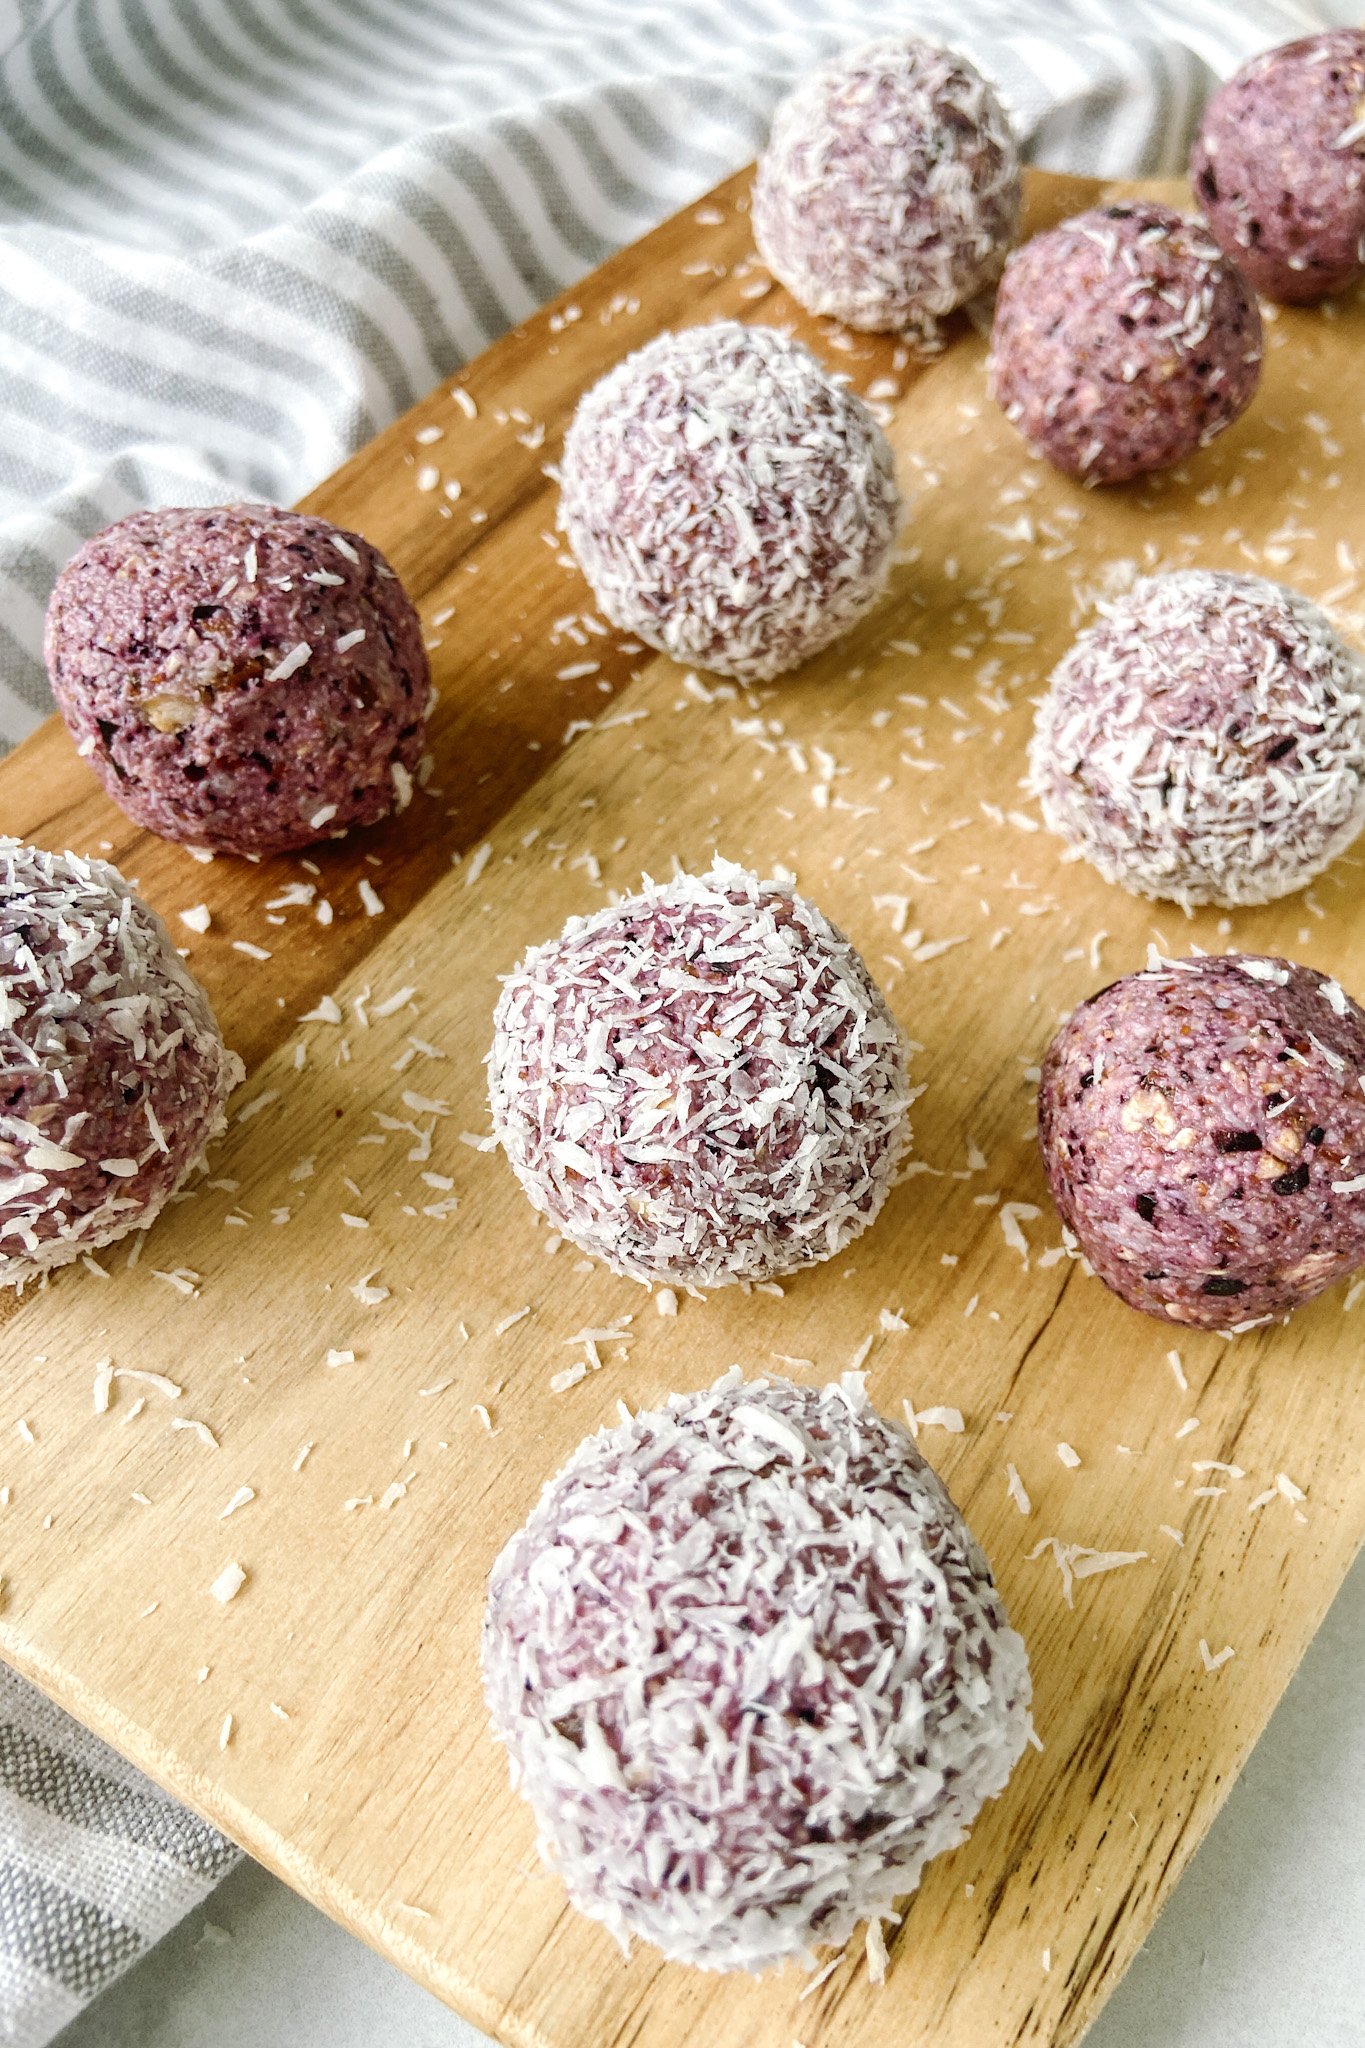 Blueberry bliss balls served on a wooden cutting board